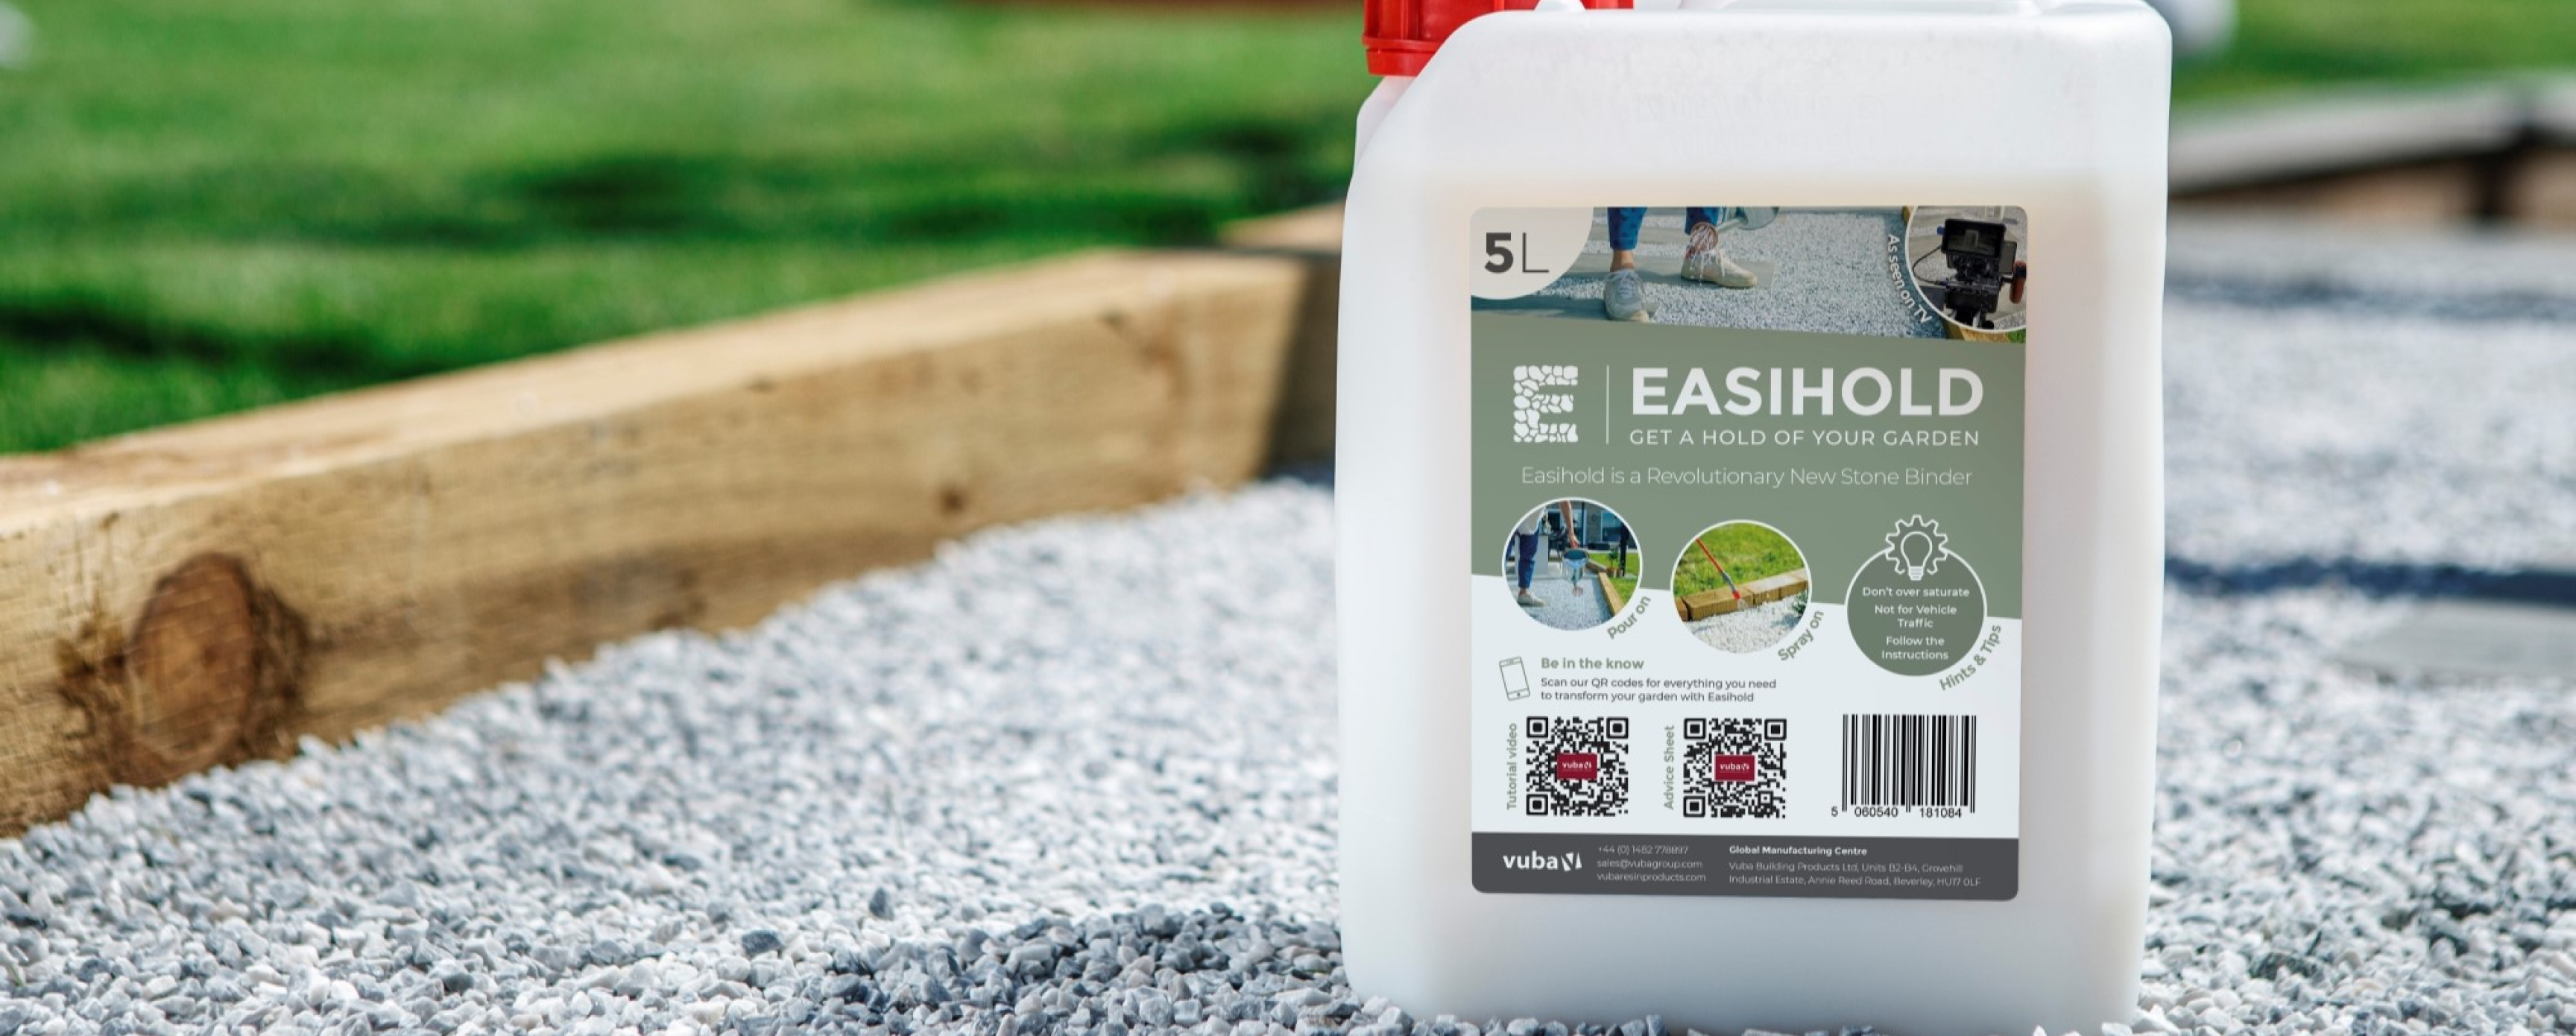 Fix loose stones with Easihold!